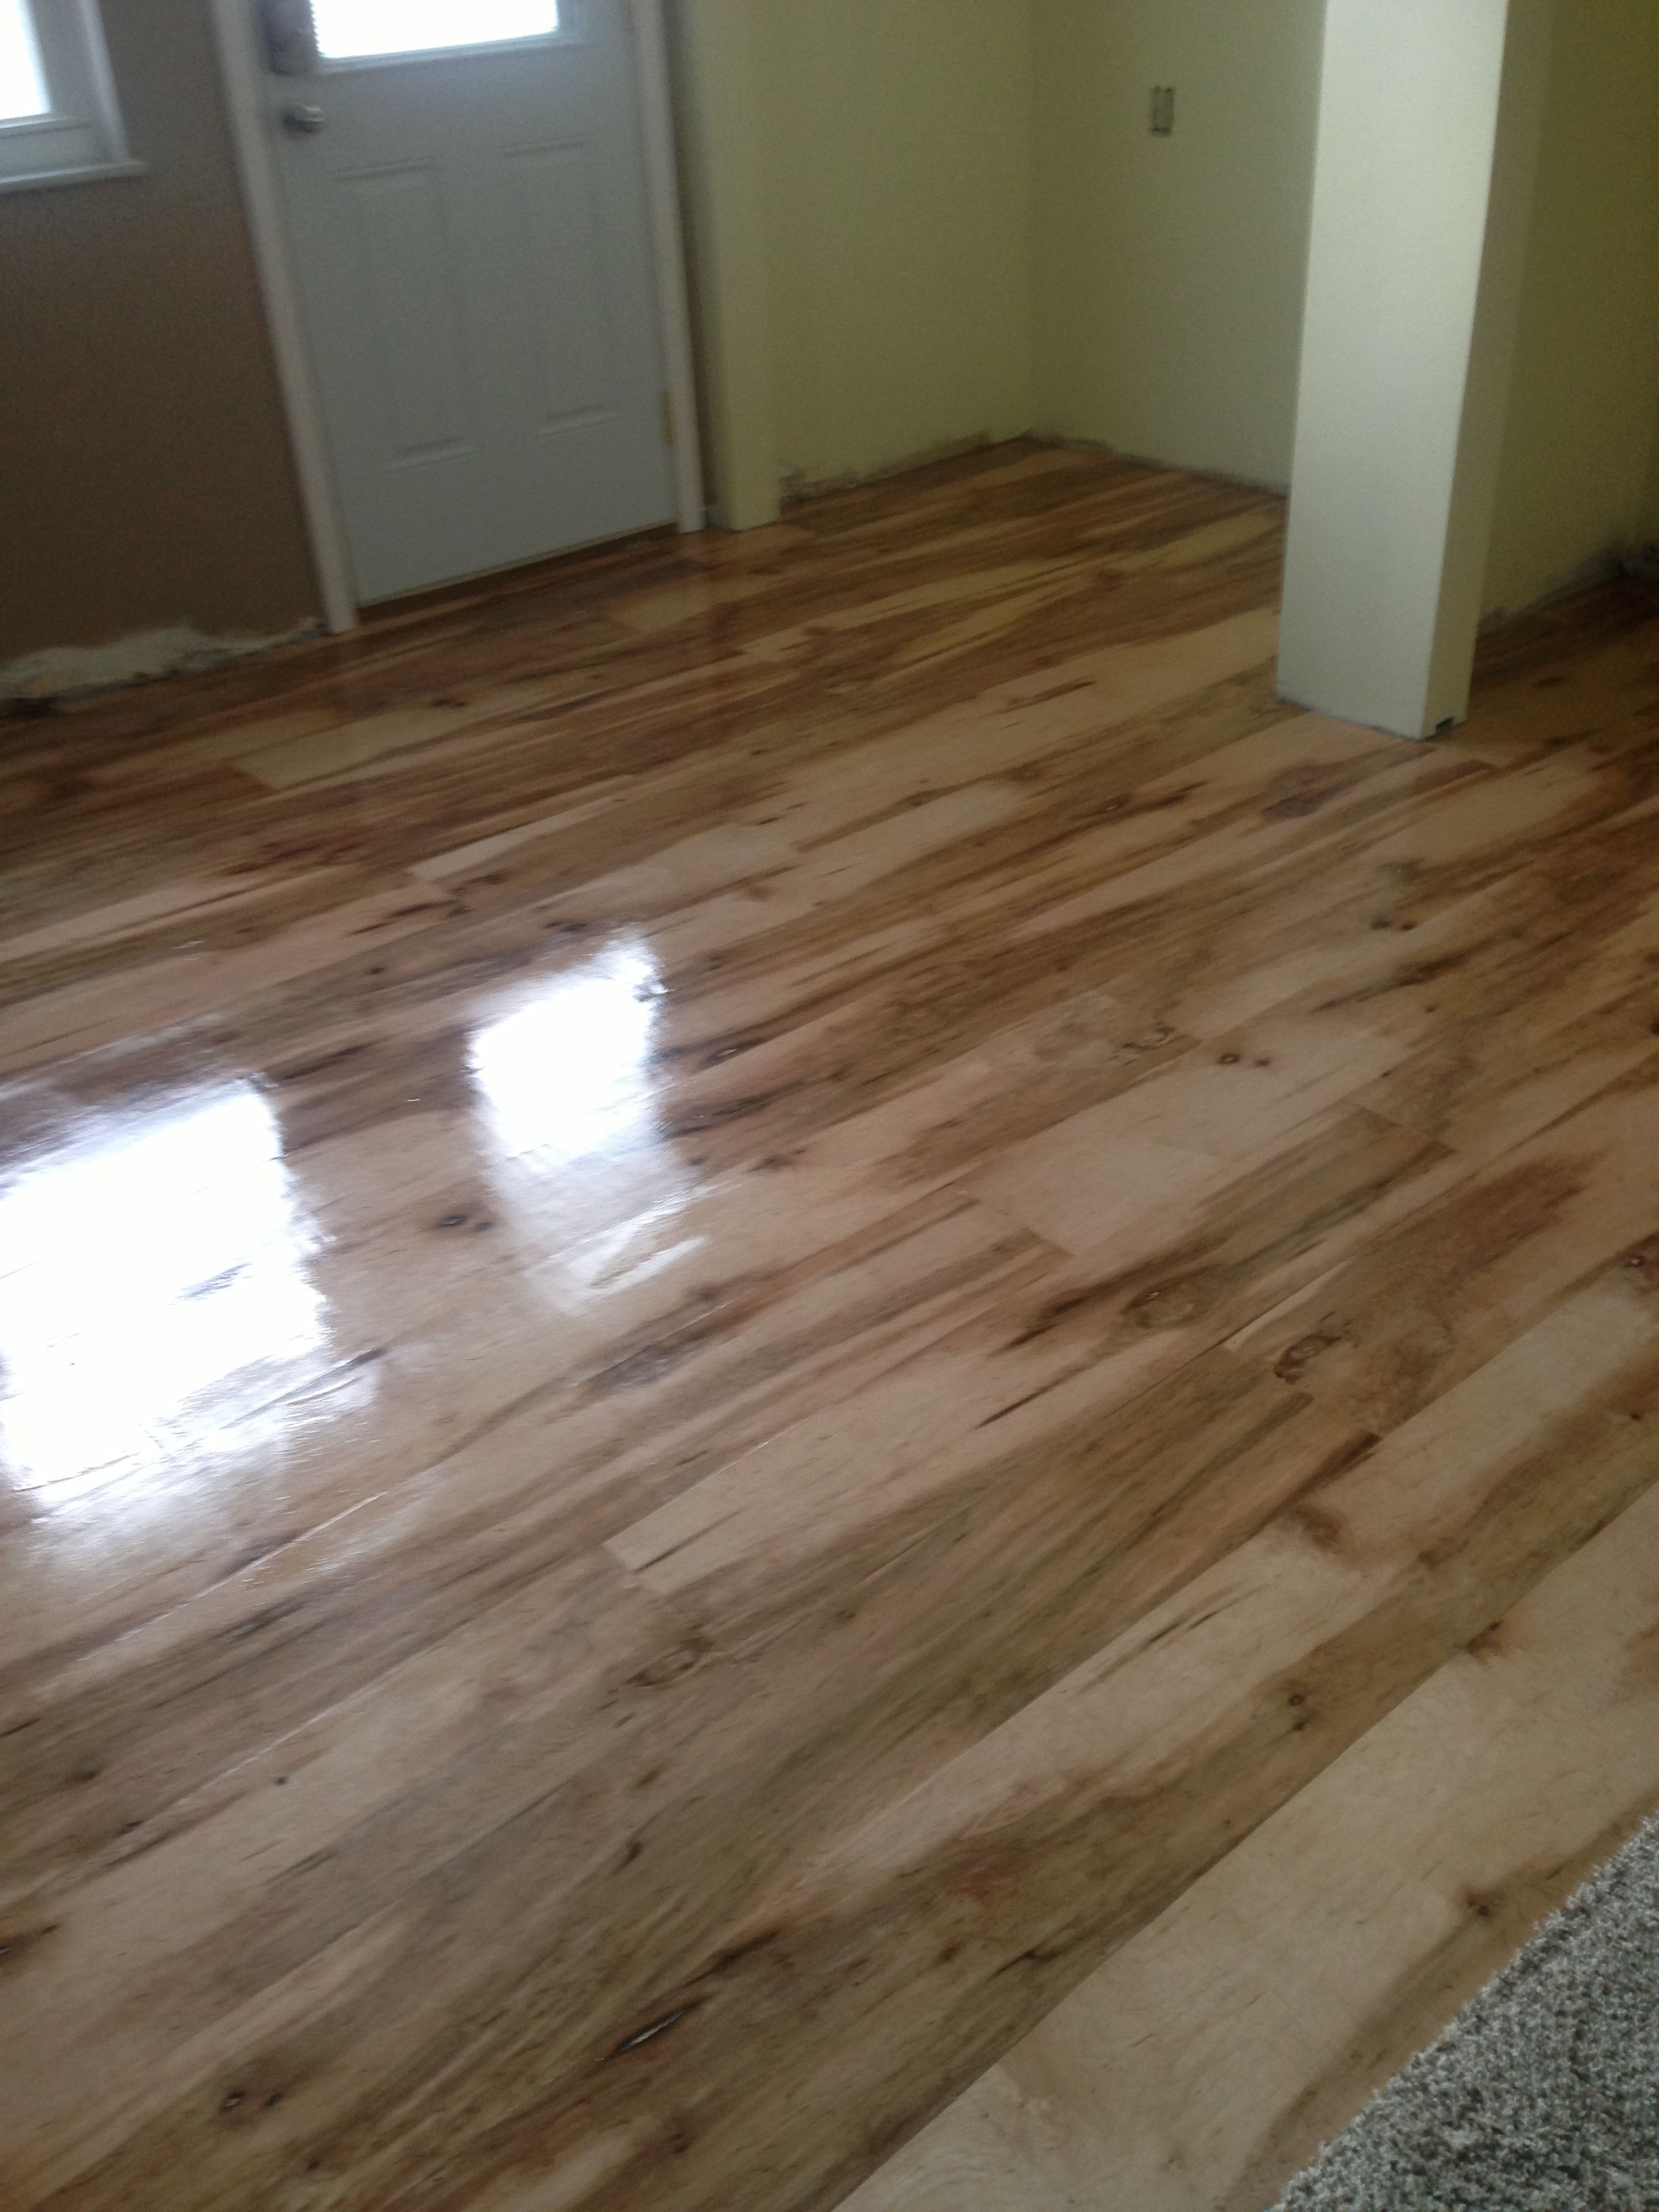 14 Great Cost to Refinish Prefinished Hardwood Floors 2024 free download cost to refinish prefinished hardwood floors of cost to refinish hardwood floors adventures in staining my red oak pertaining to cost to refinish hardwood floors the final finish of the plyw